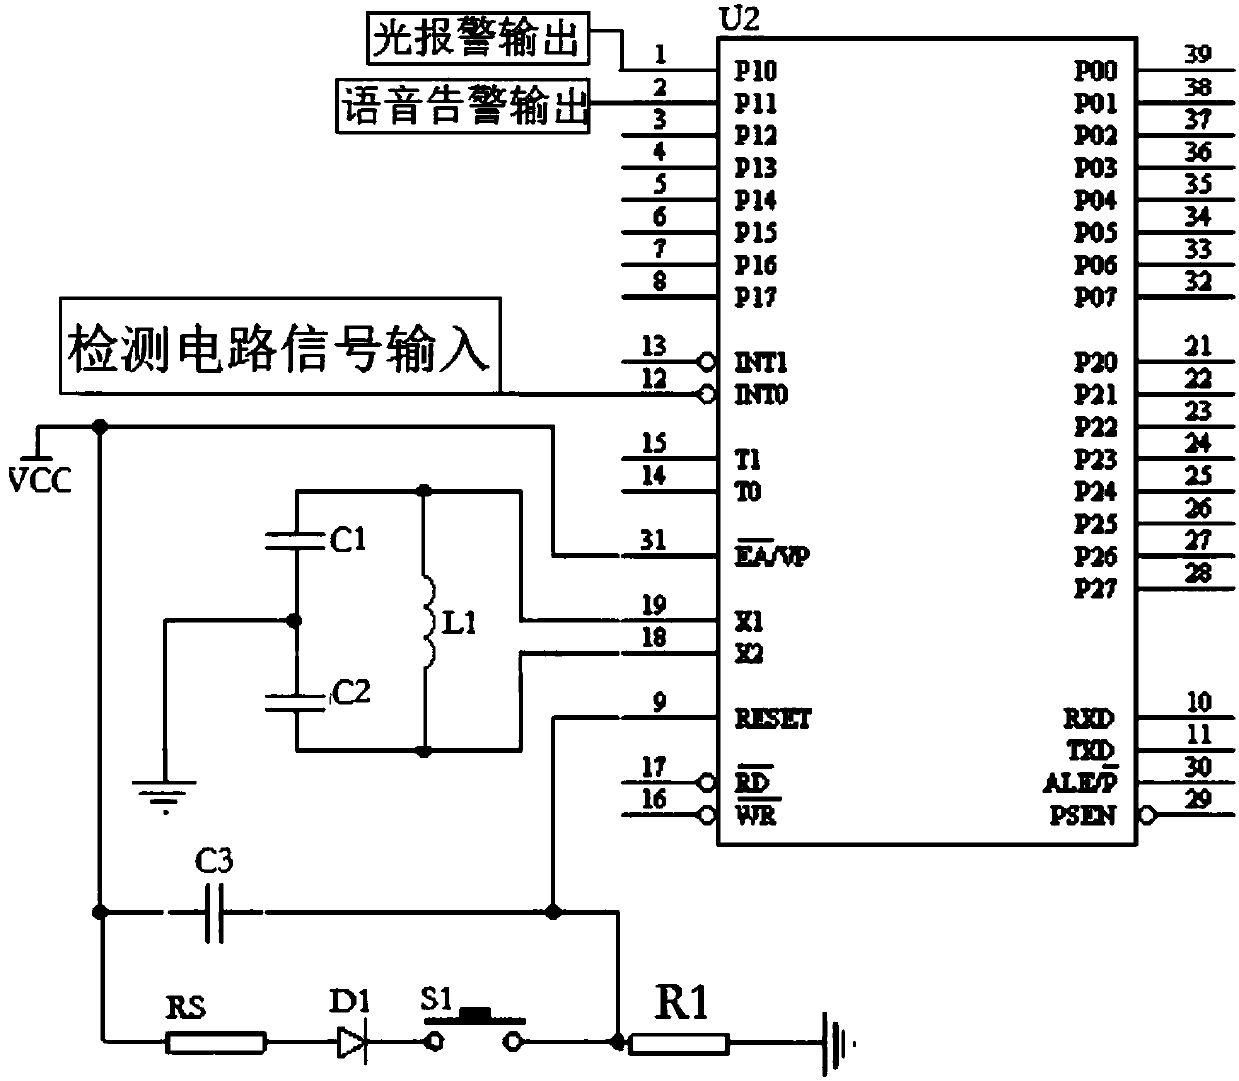 Multifunctional automobile recorder device